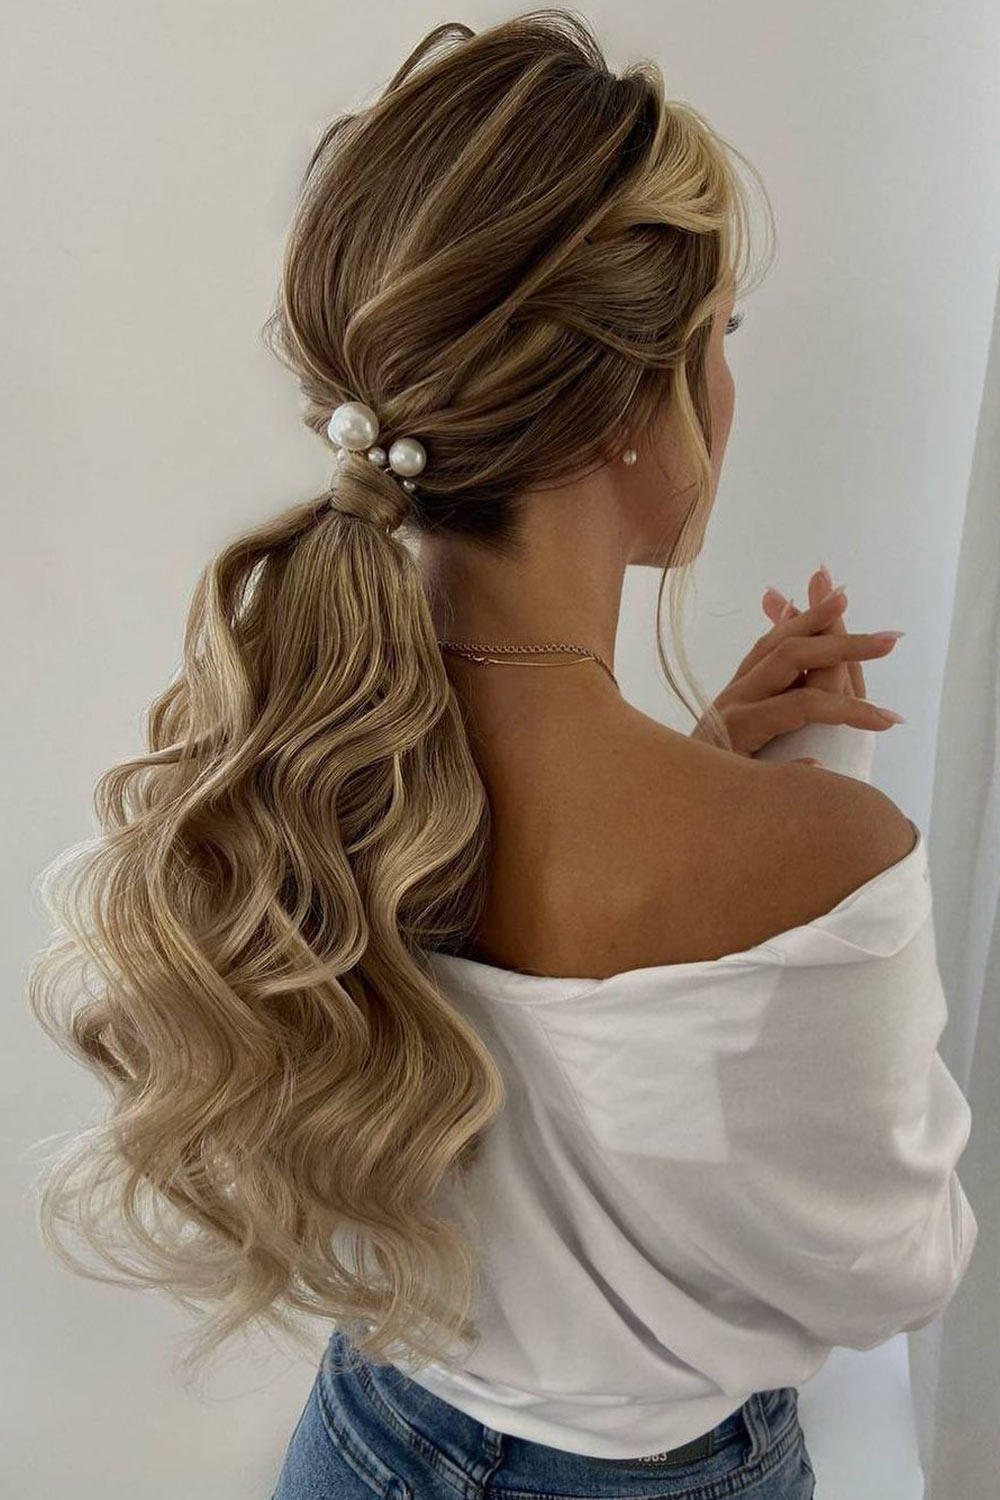 Gorgeous Low Ponytails For An Amazing Look